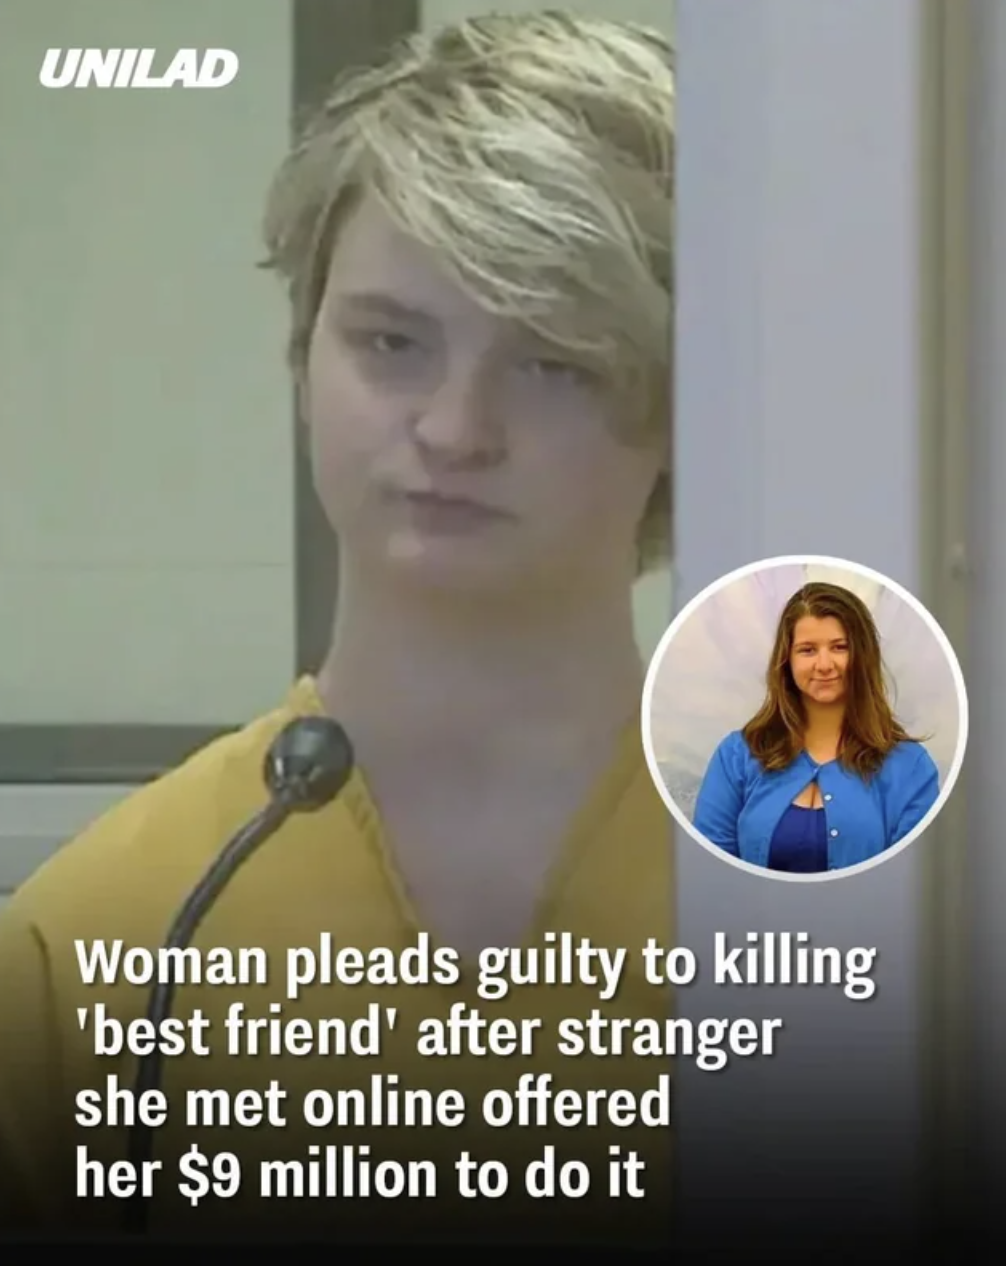 Fails and Facepalms - Murder - Unilad Woman pleads guilty to killing 'best friend' after stranger she met online offered her $9 million to do it